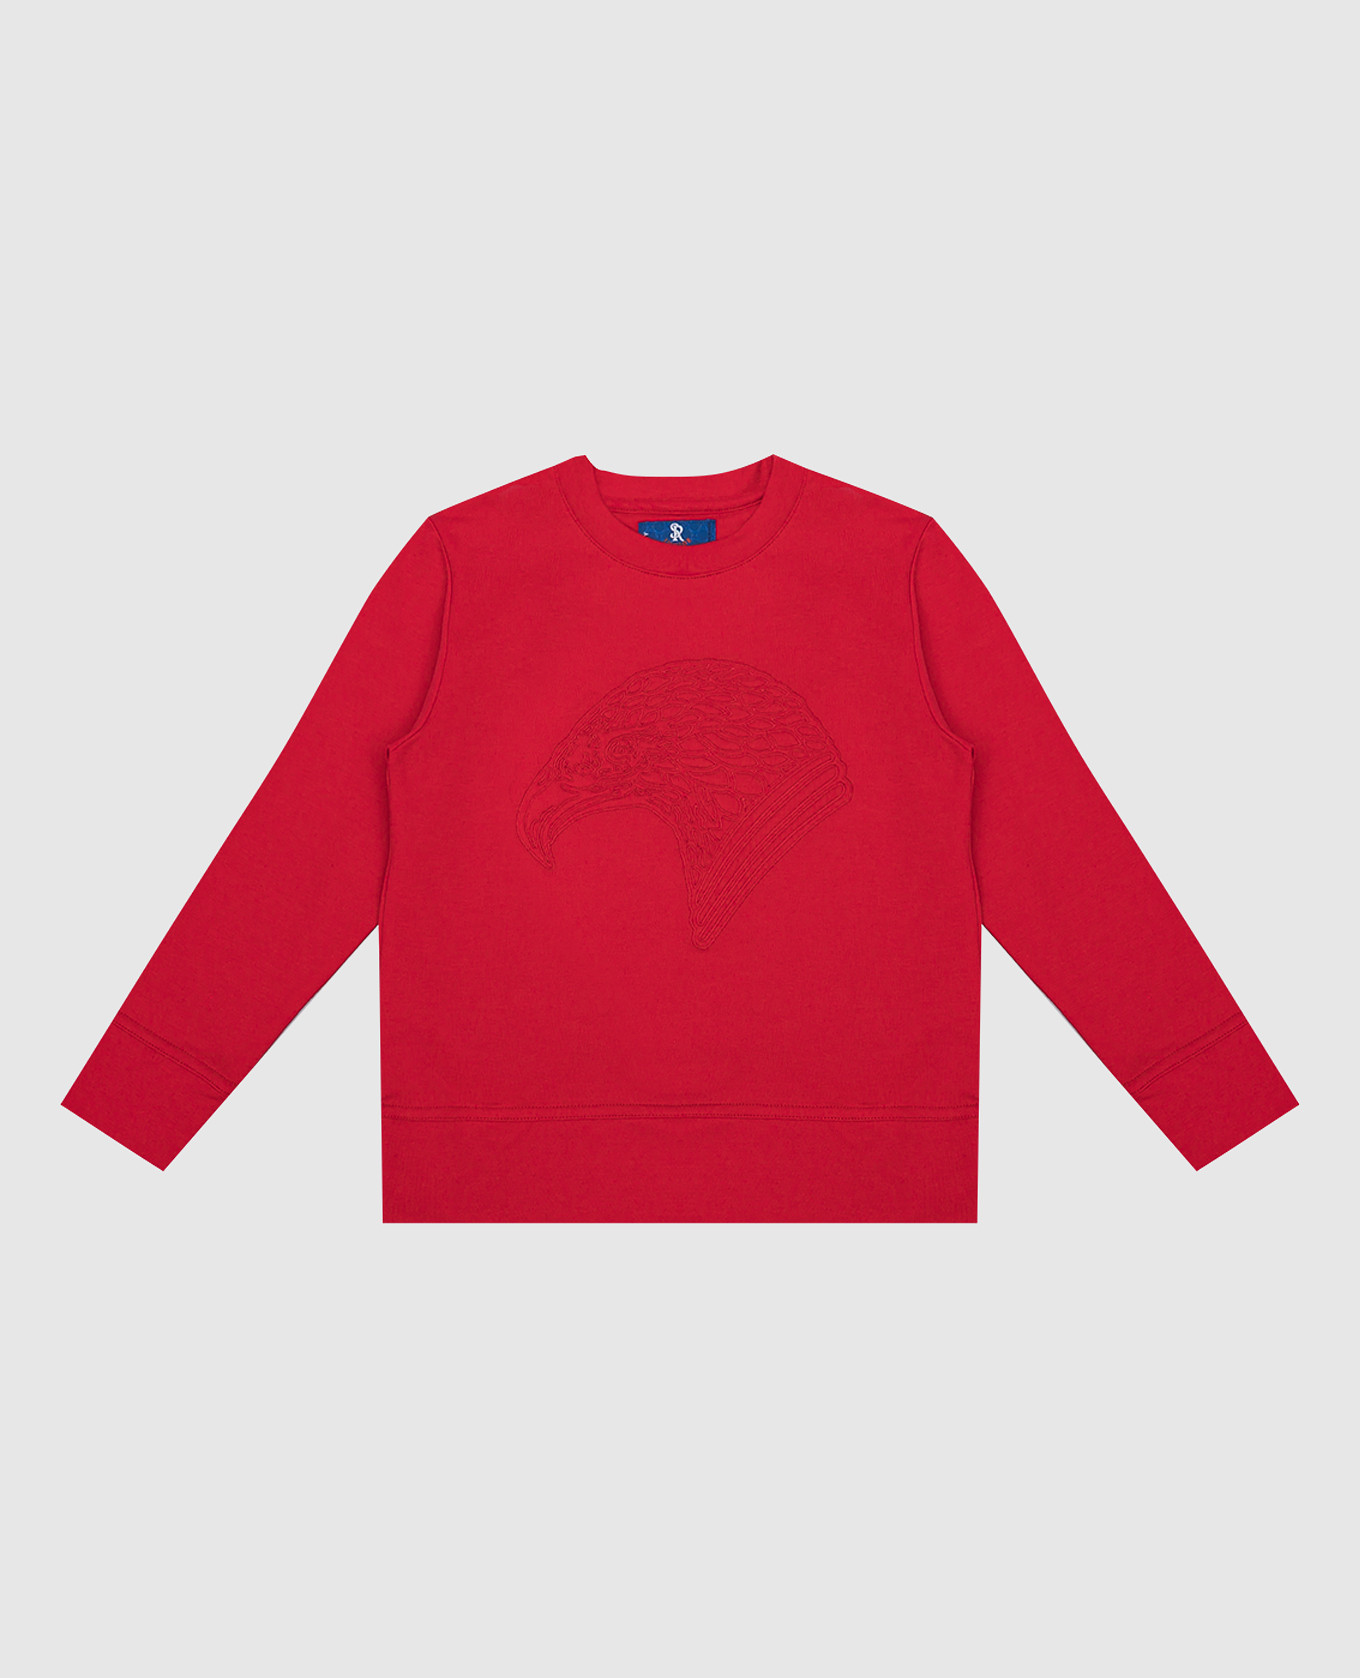 Children's red sweatshirt with an embroidered logo in the form of an eagle head